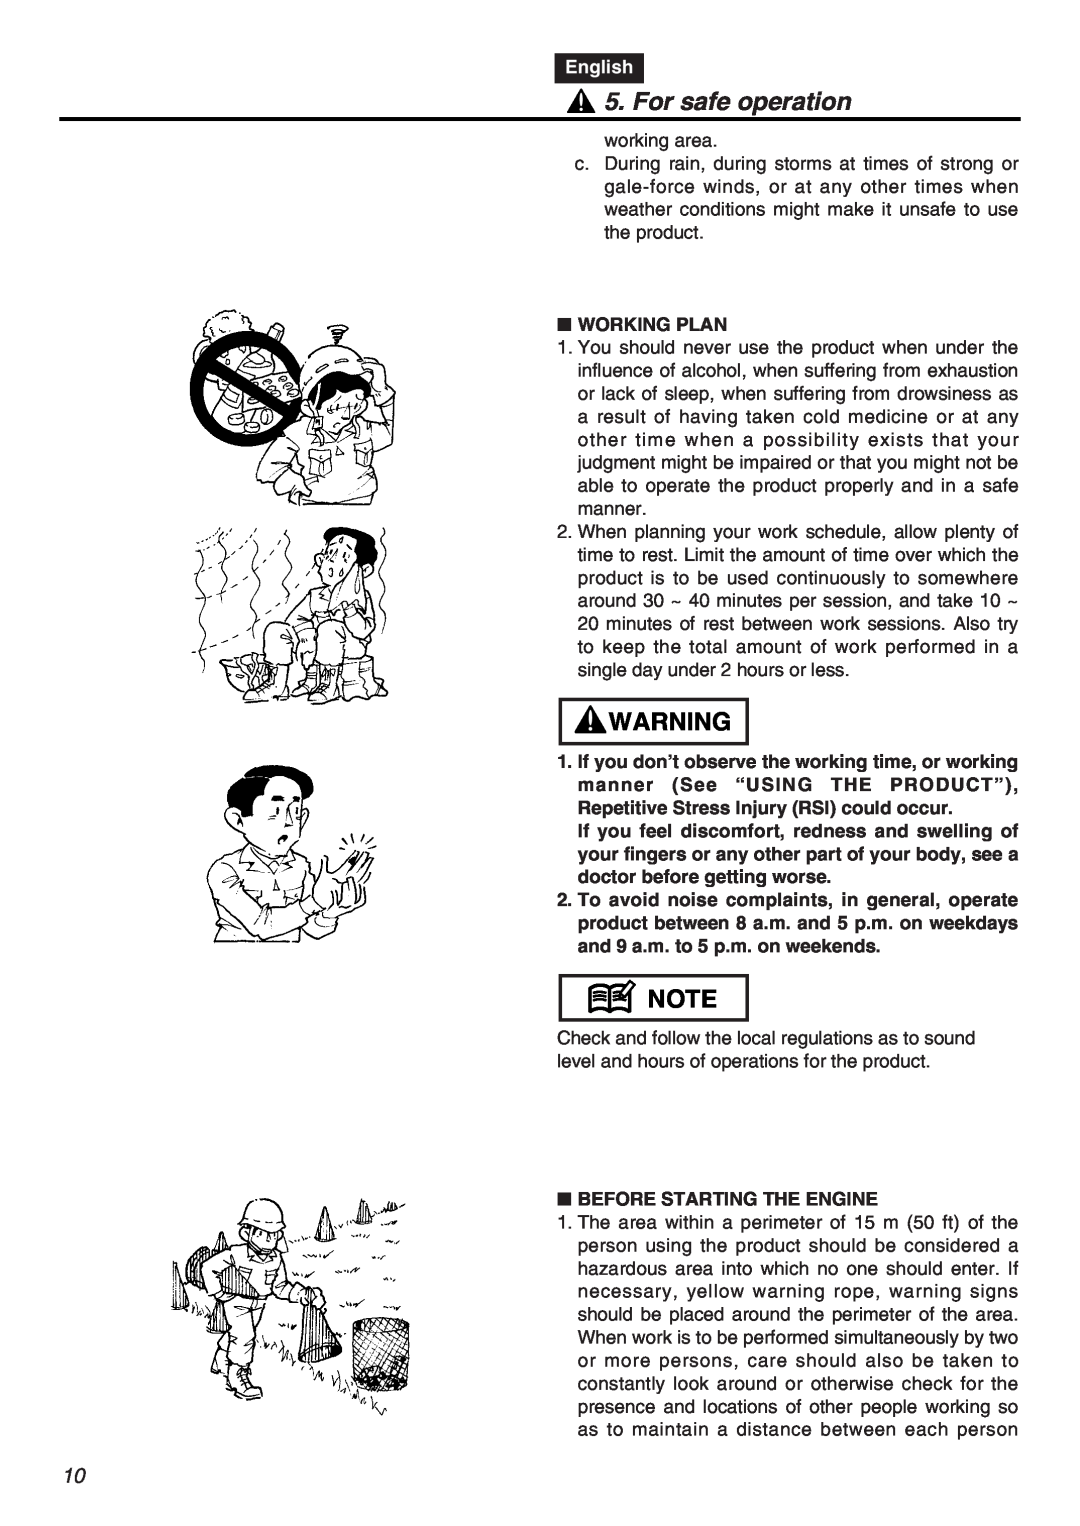 RedMax CHTZ2401-CA, CHTZ2401L-CA manual For safe operation, English, Working Plan 